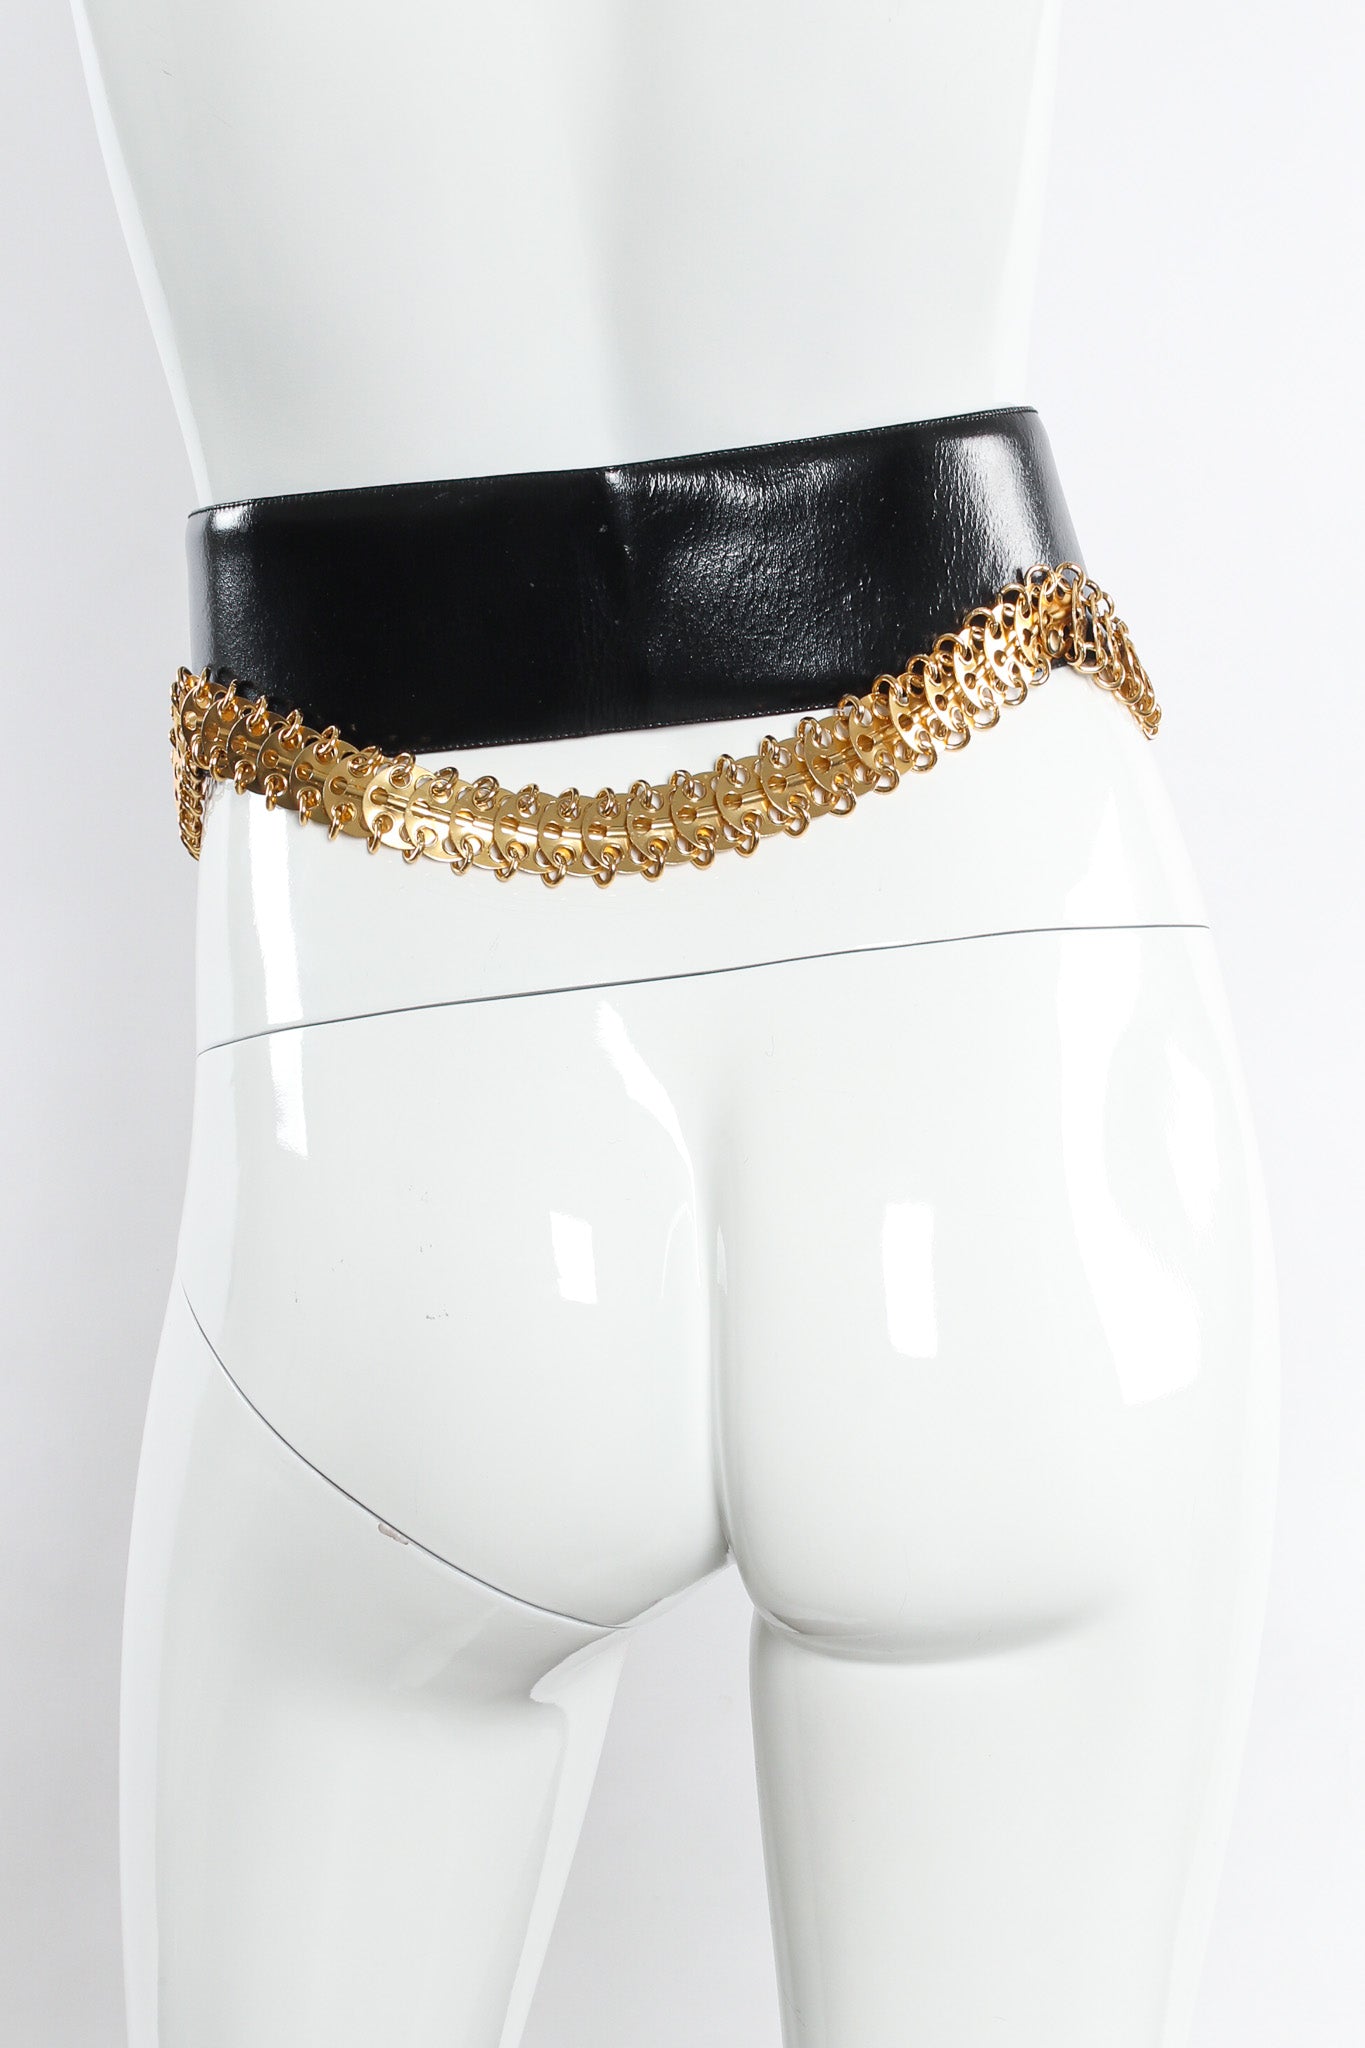 leather belt with spinal chain by Bullocks Wilshire mannequin back @recessla